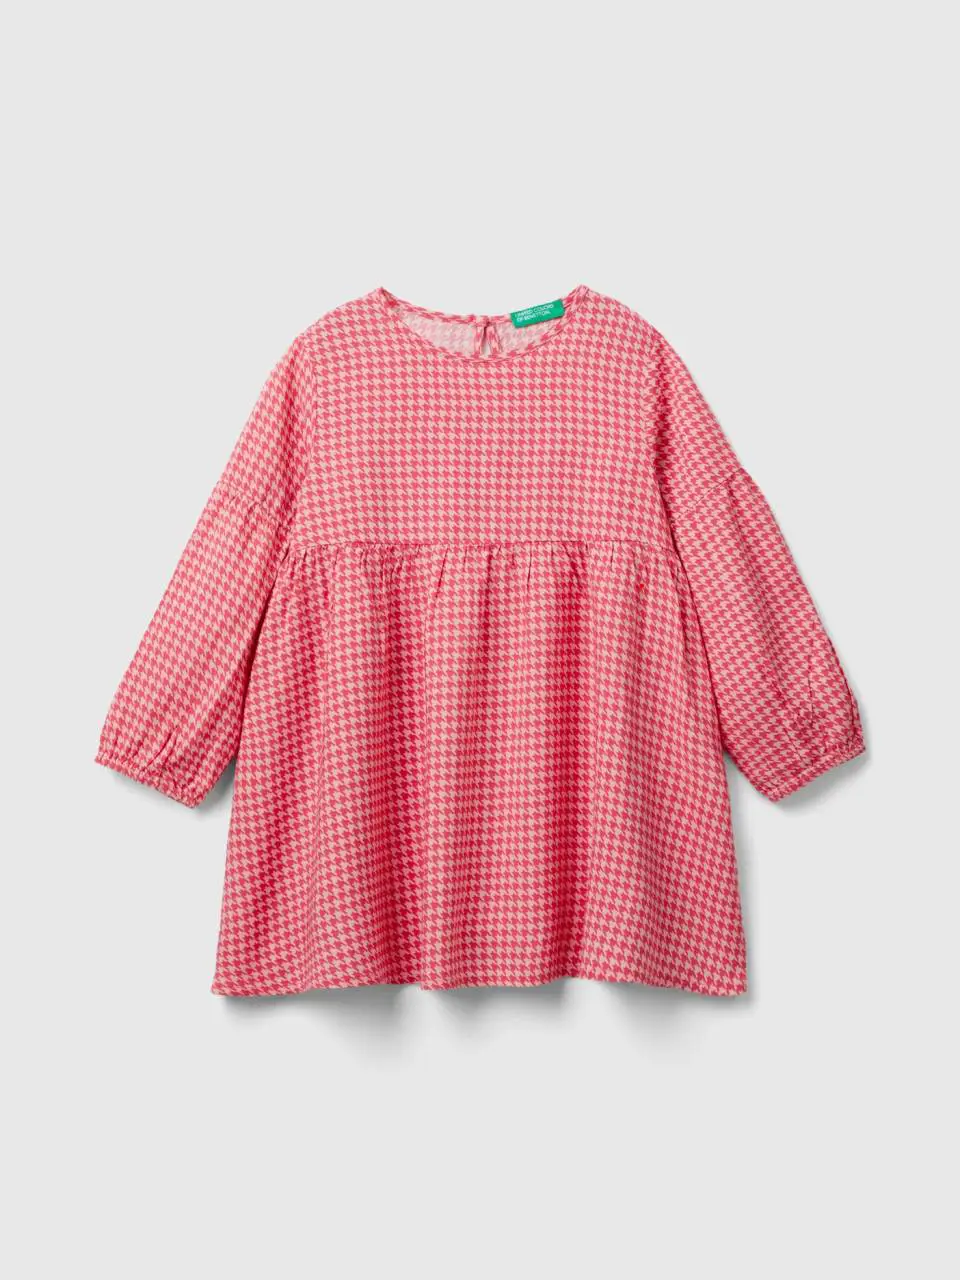 Benetton houndstooth dress in sustainable viscose. 1